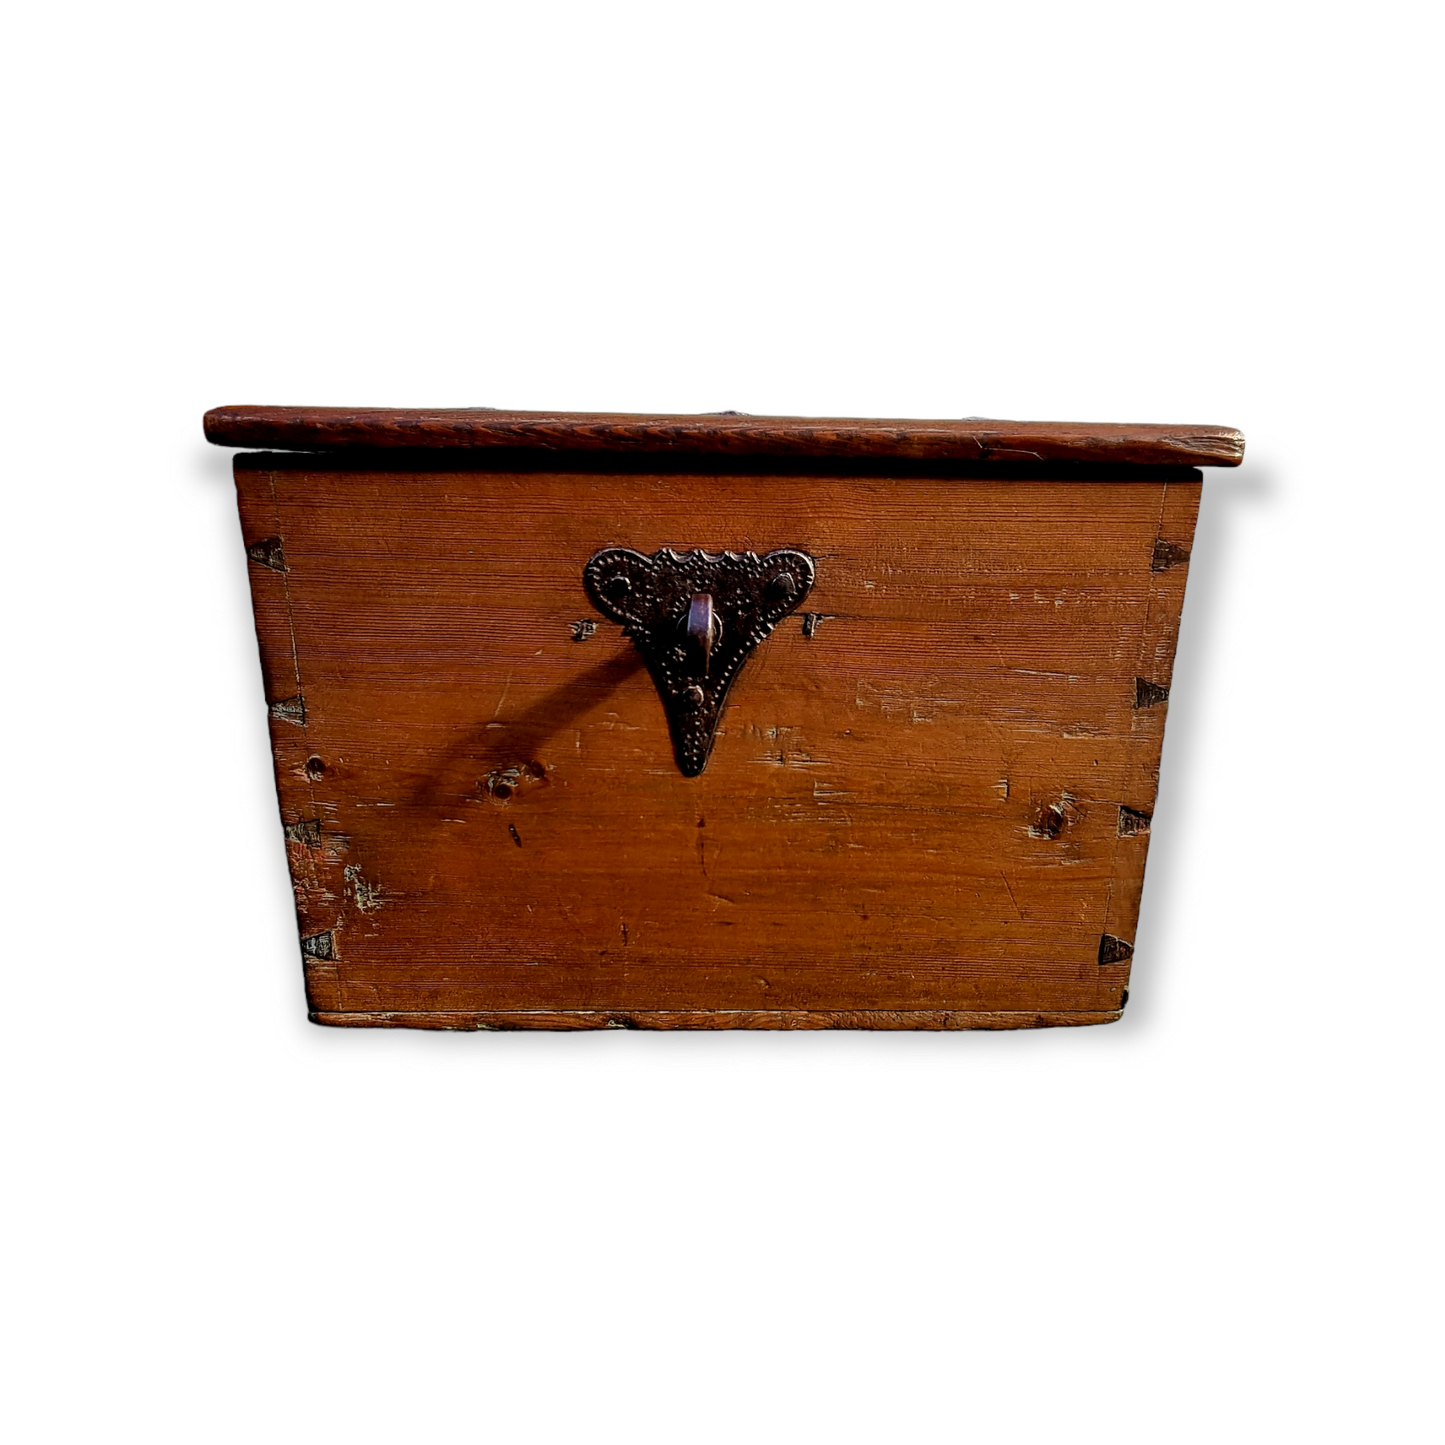 Early 18th Century Continental Antique Pine Tabletop Boarded Box Of Diminutive Size